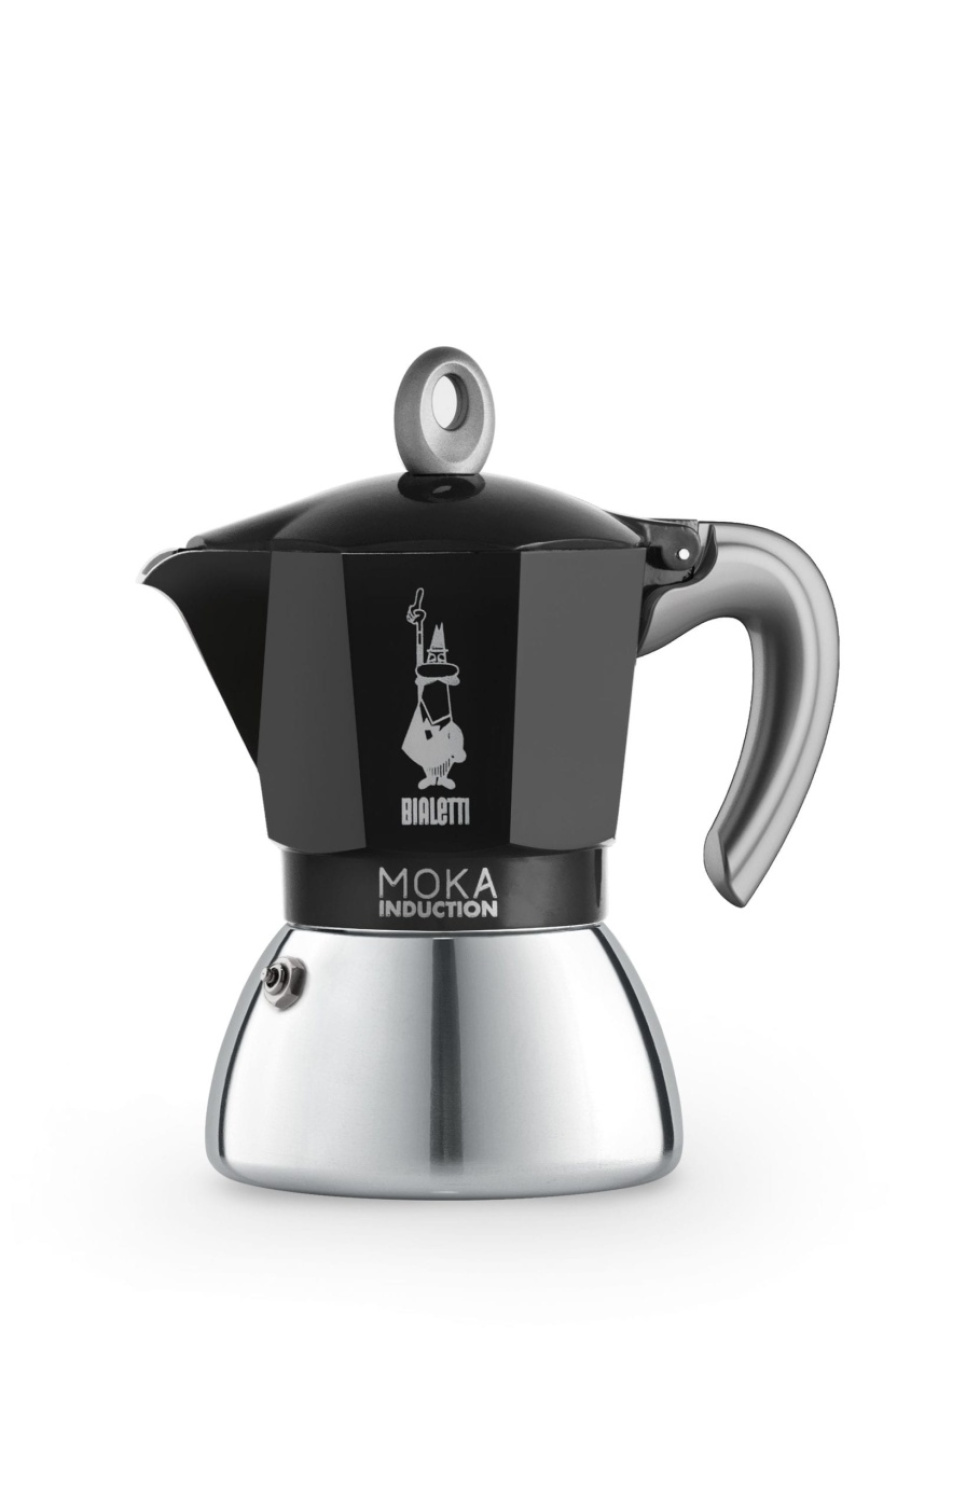 Moka Induction - Bialetti in the group Tea & Coffee / Brew coffee / Coffee maker at KitchenLab (1086-23687)